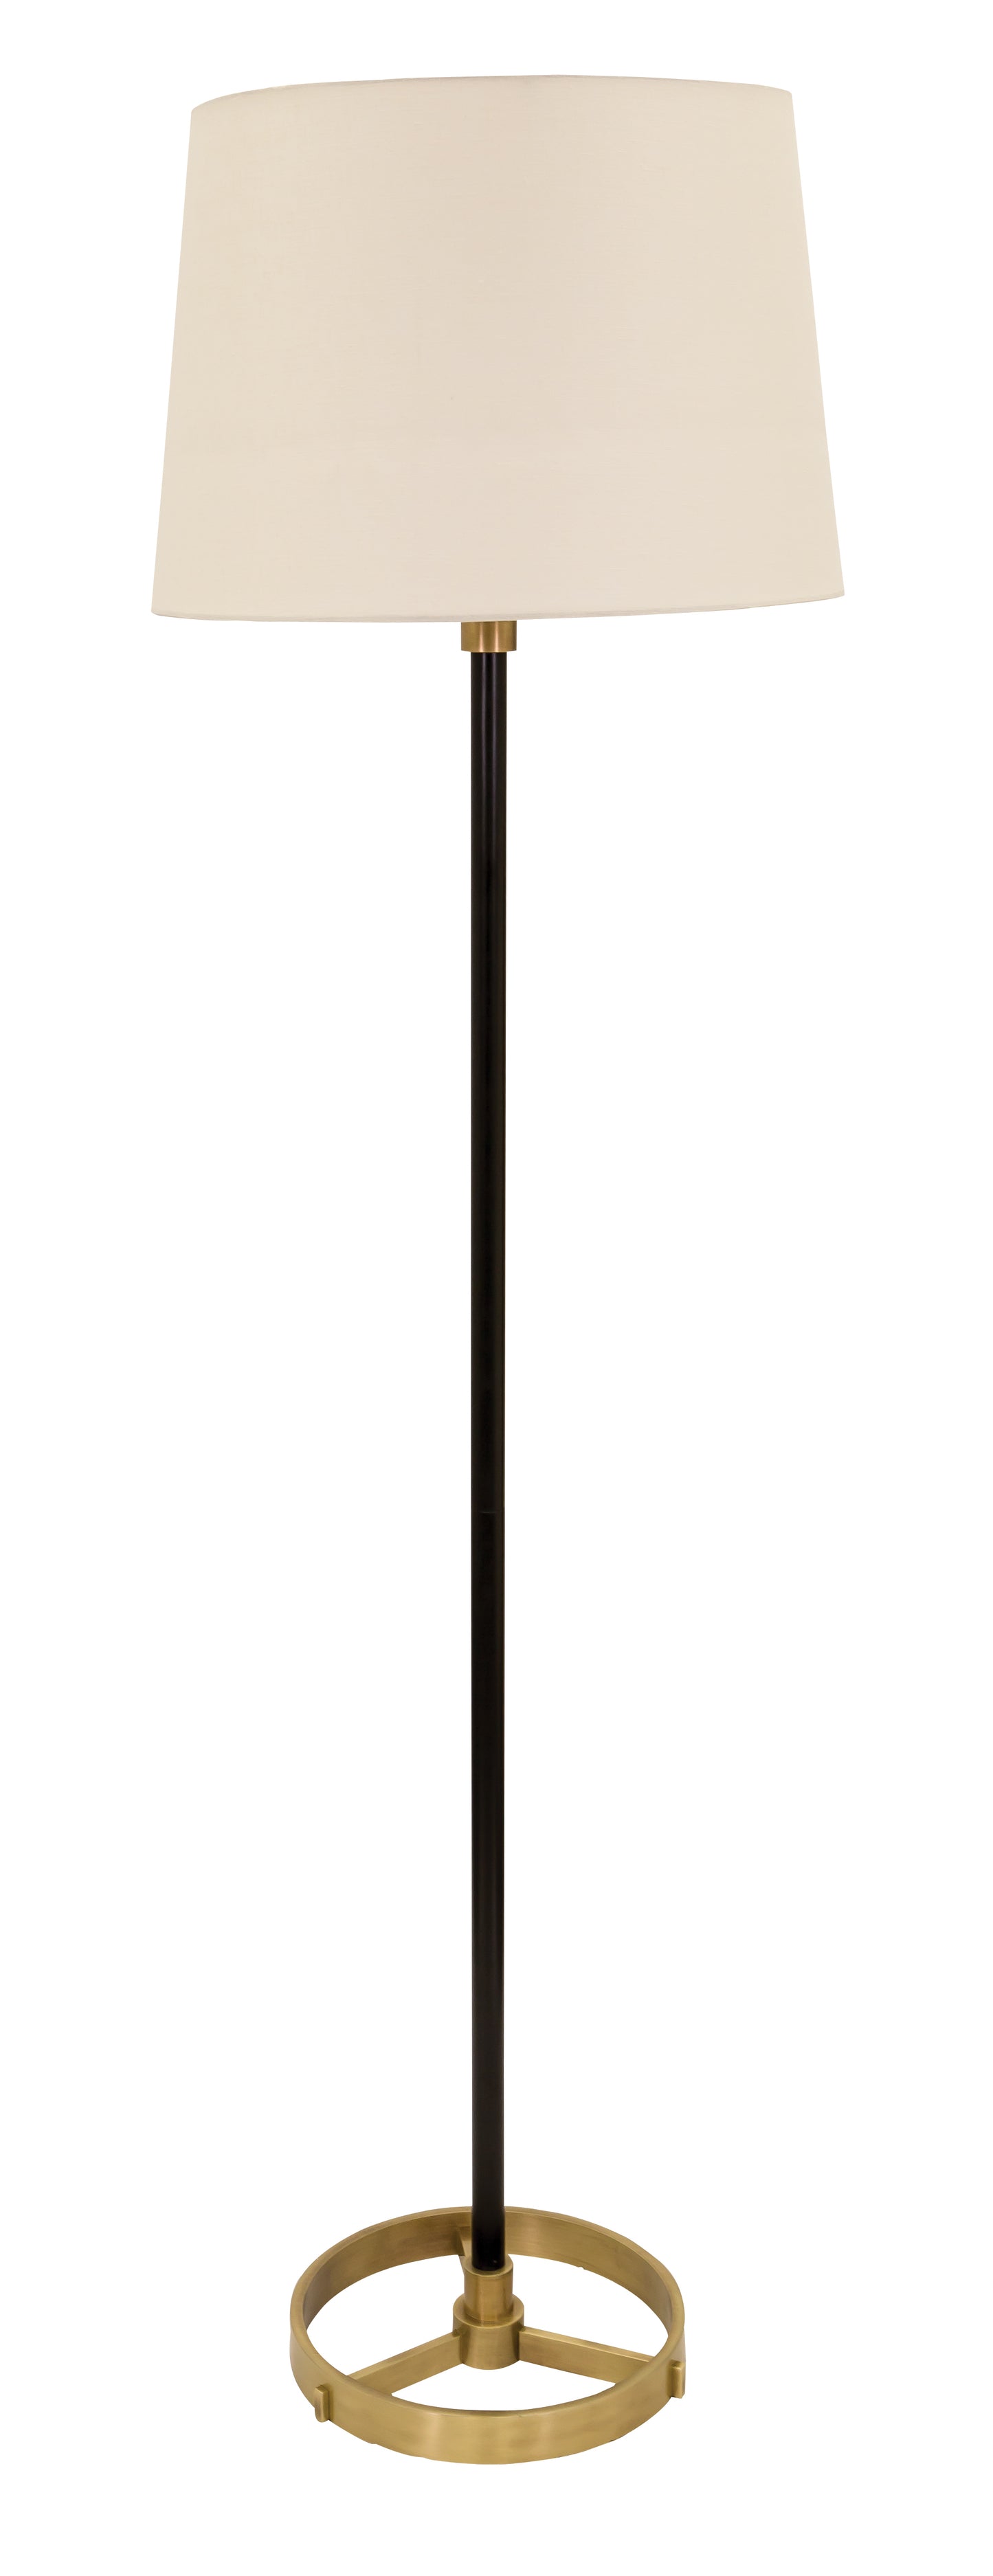 House of Troy 62" Morgan Floor Lamp in Black with Antique Brass M600-BLKAB